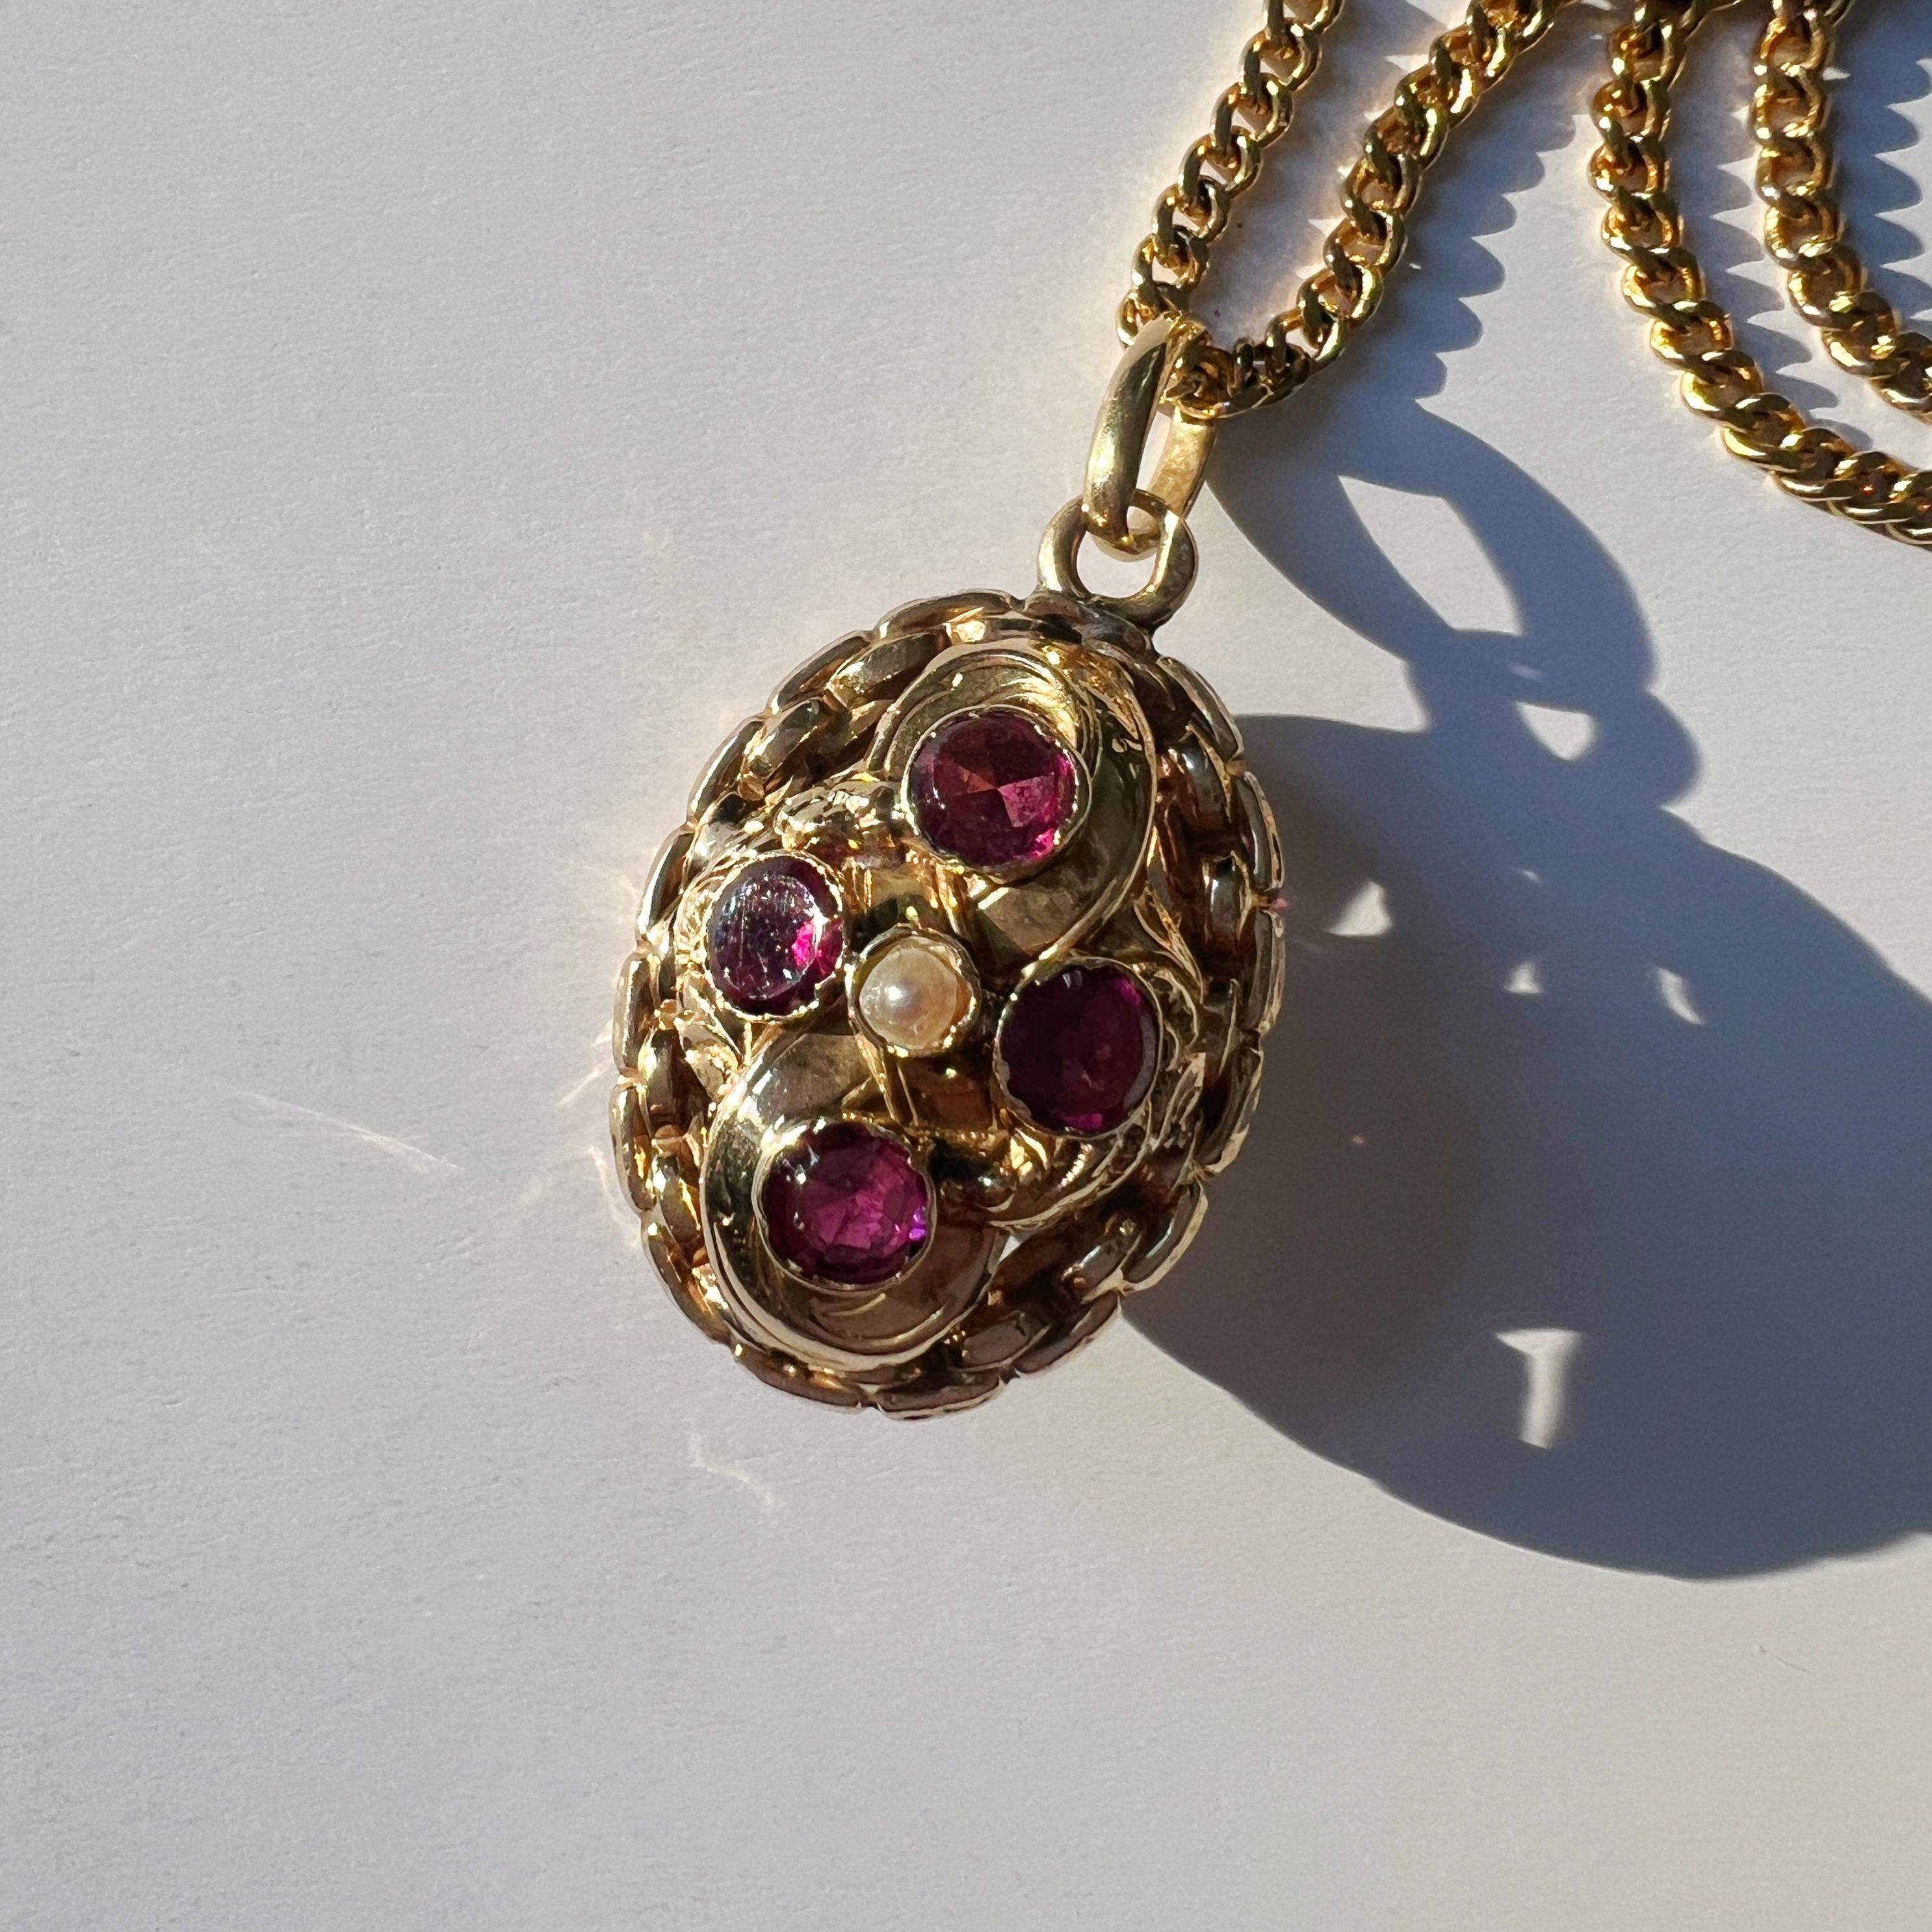 Antique French Victorian era 18K double sided garnet pendant For Sale 1